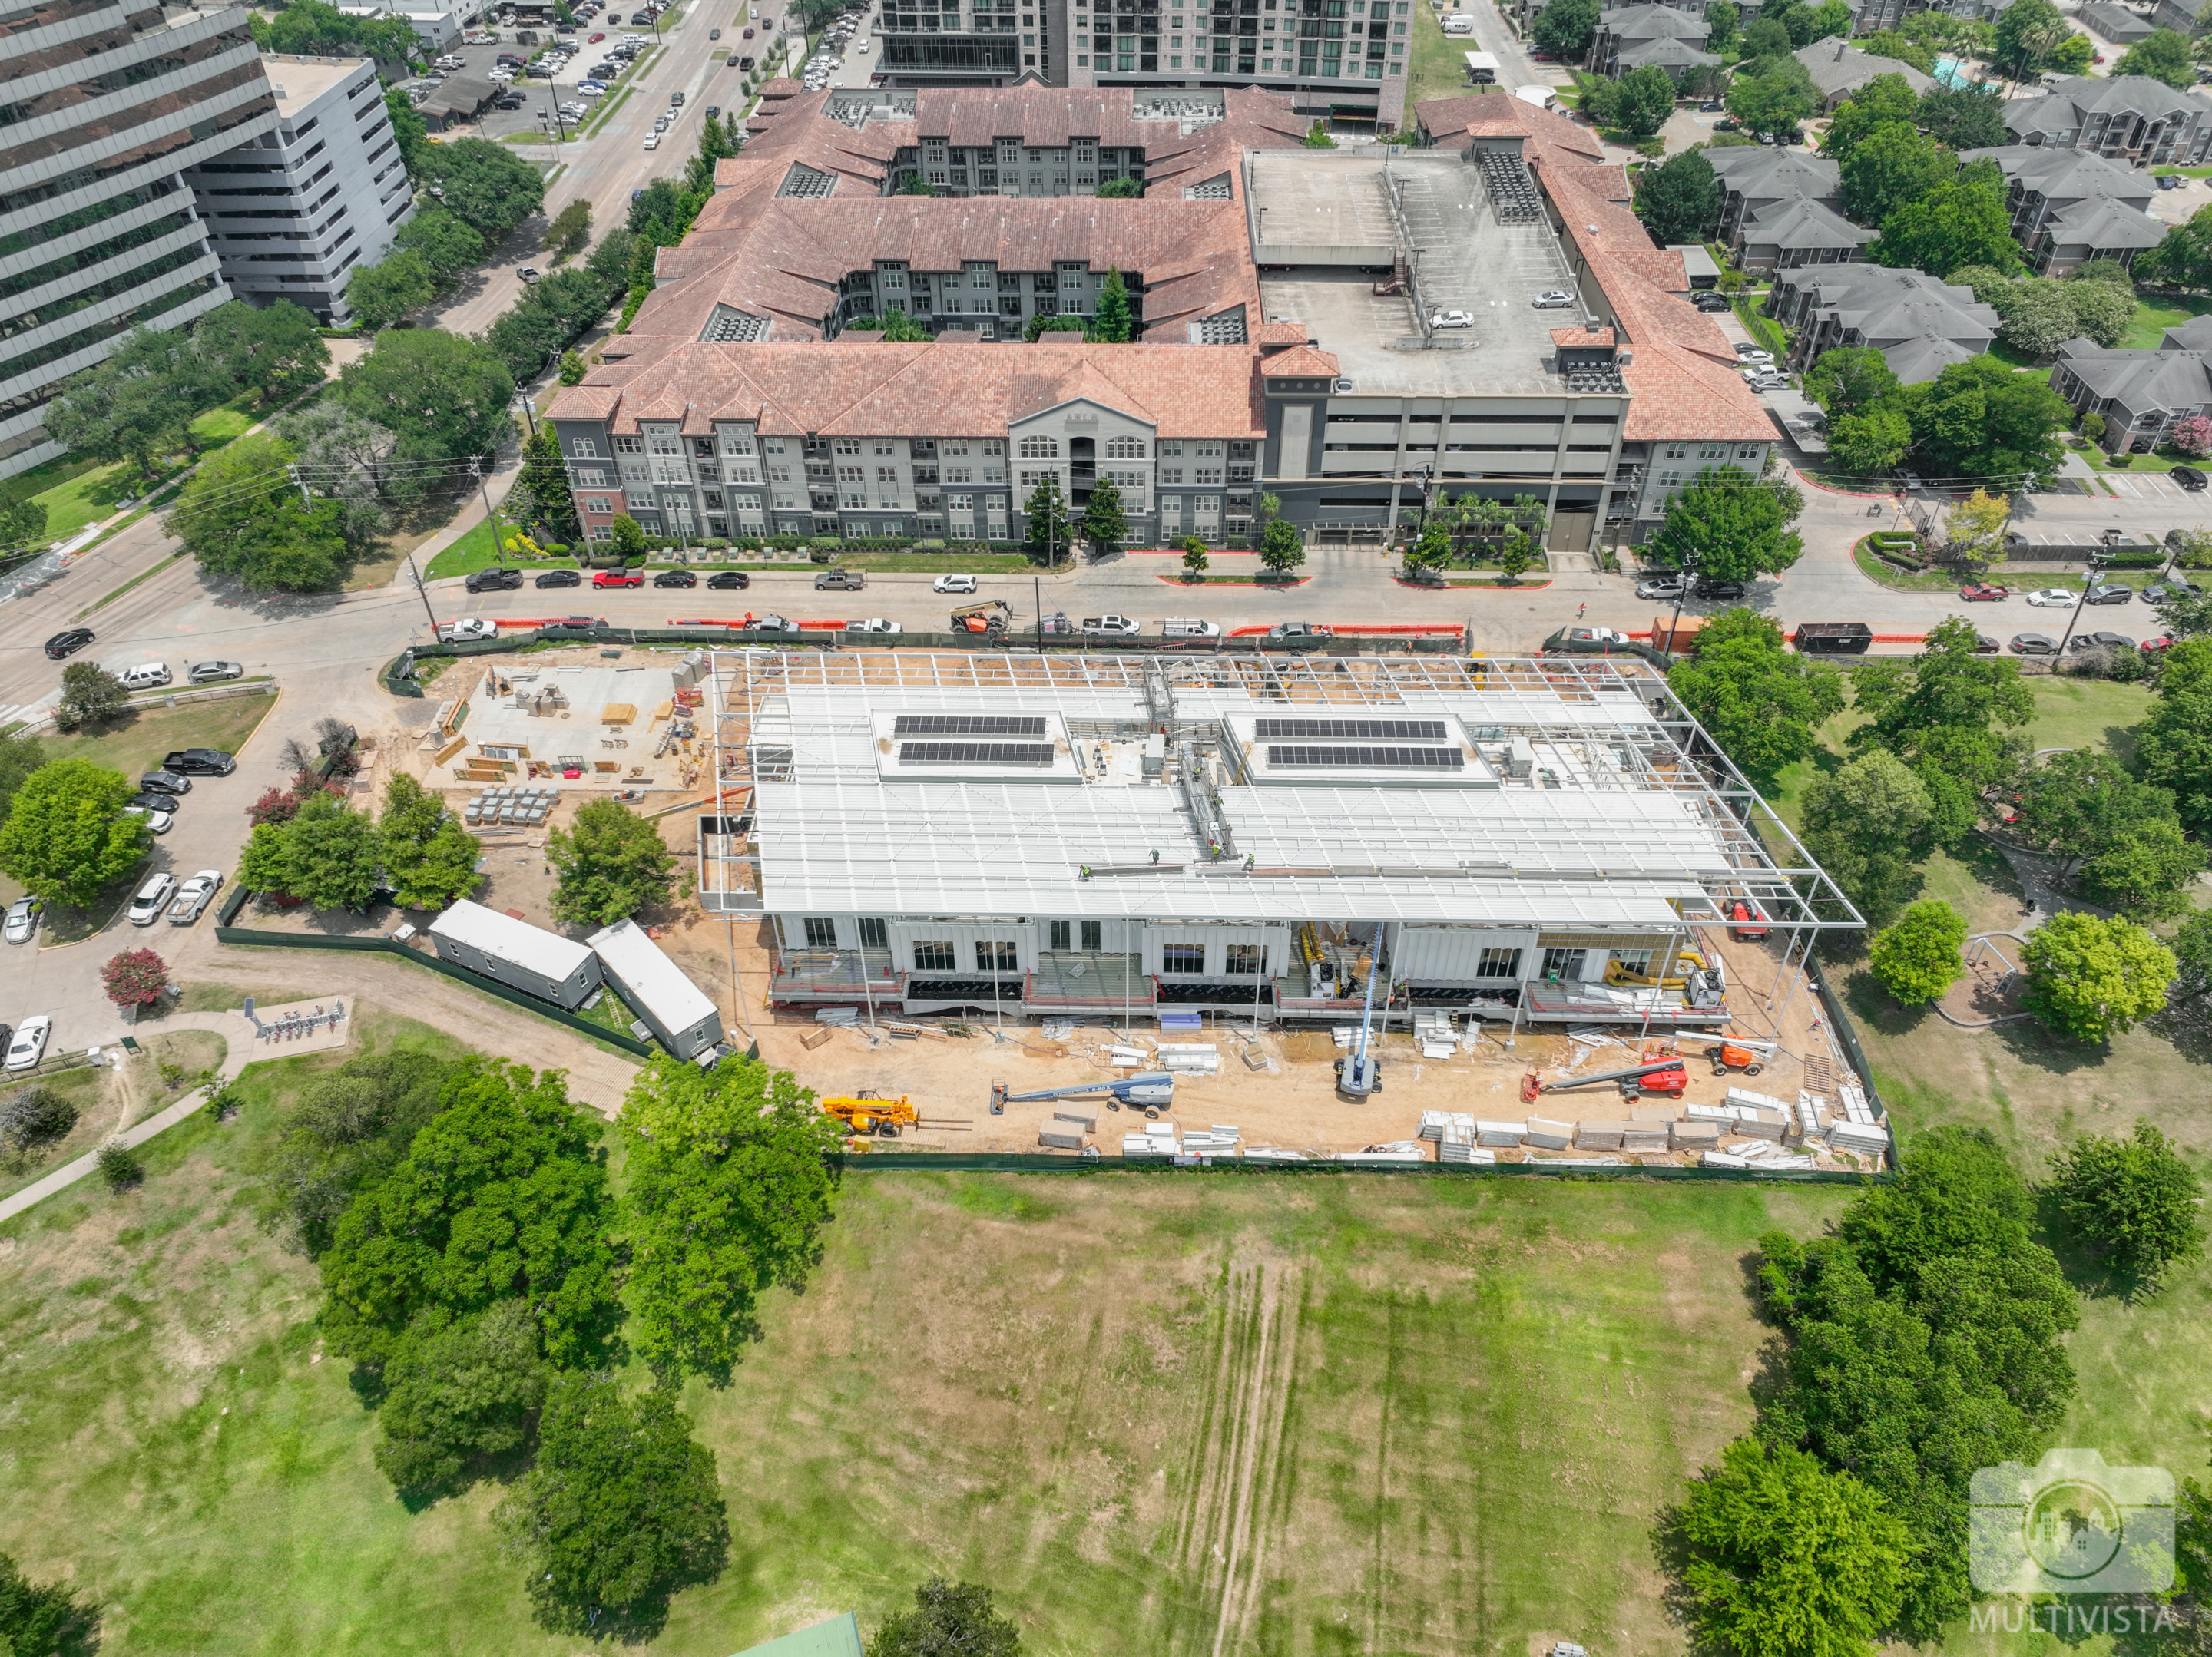 Aerial view of building under construction